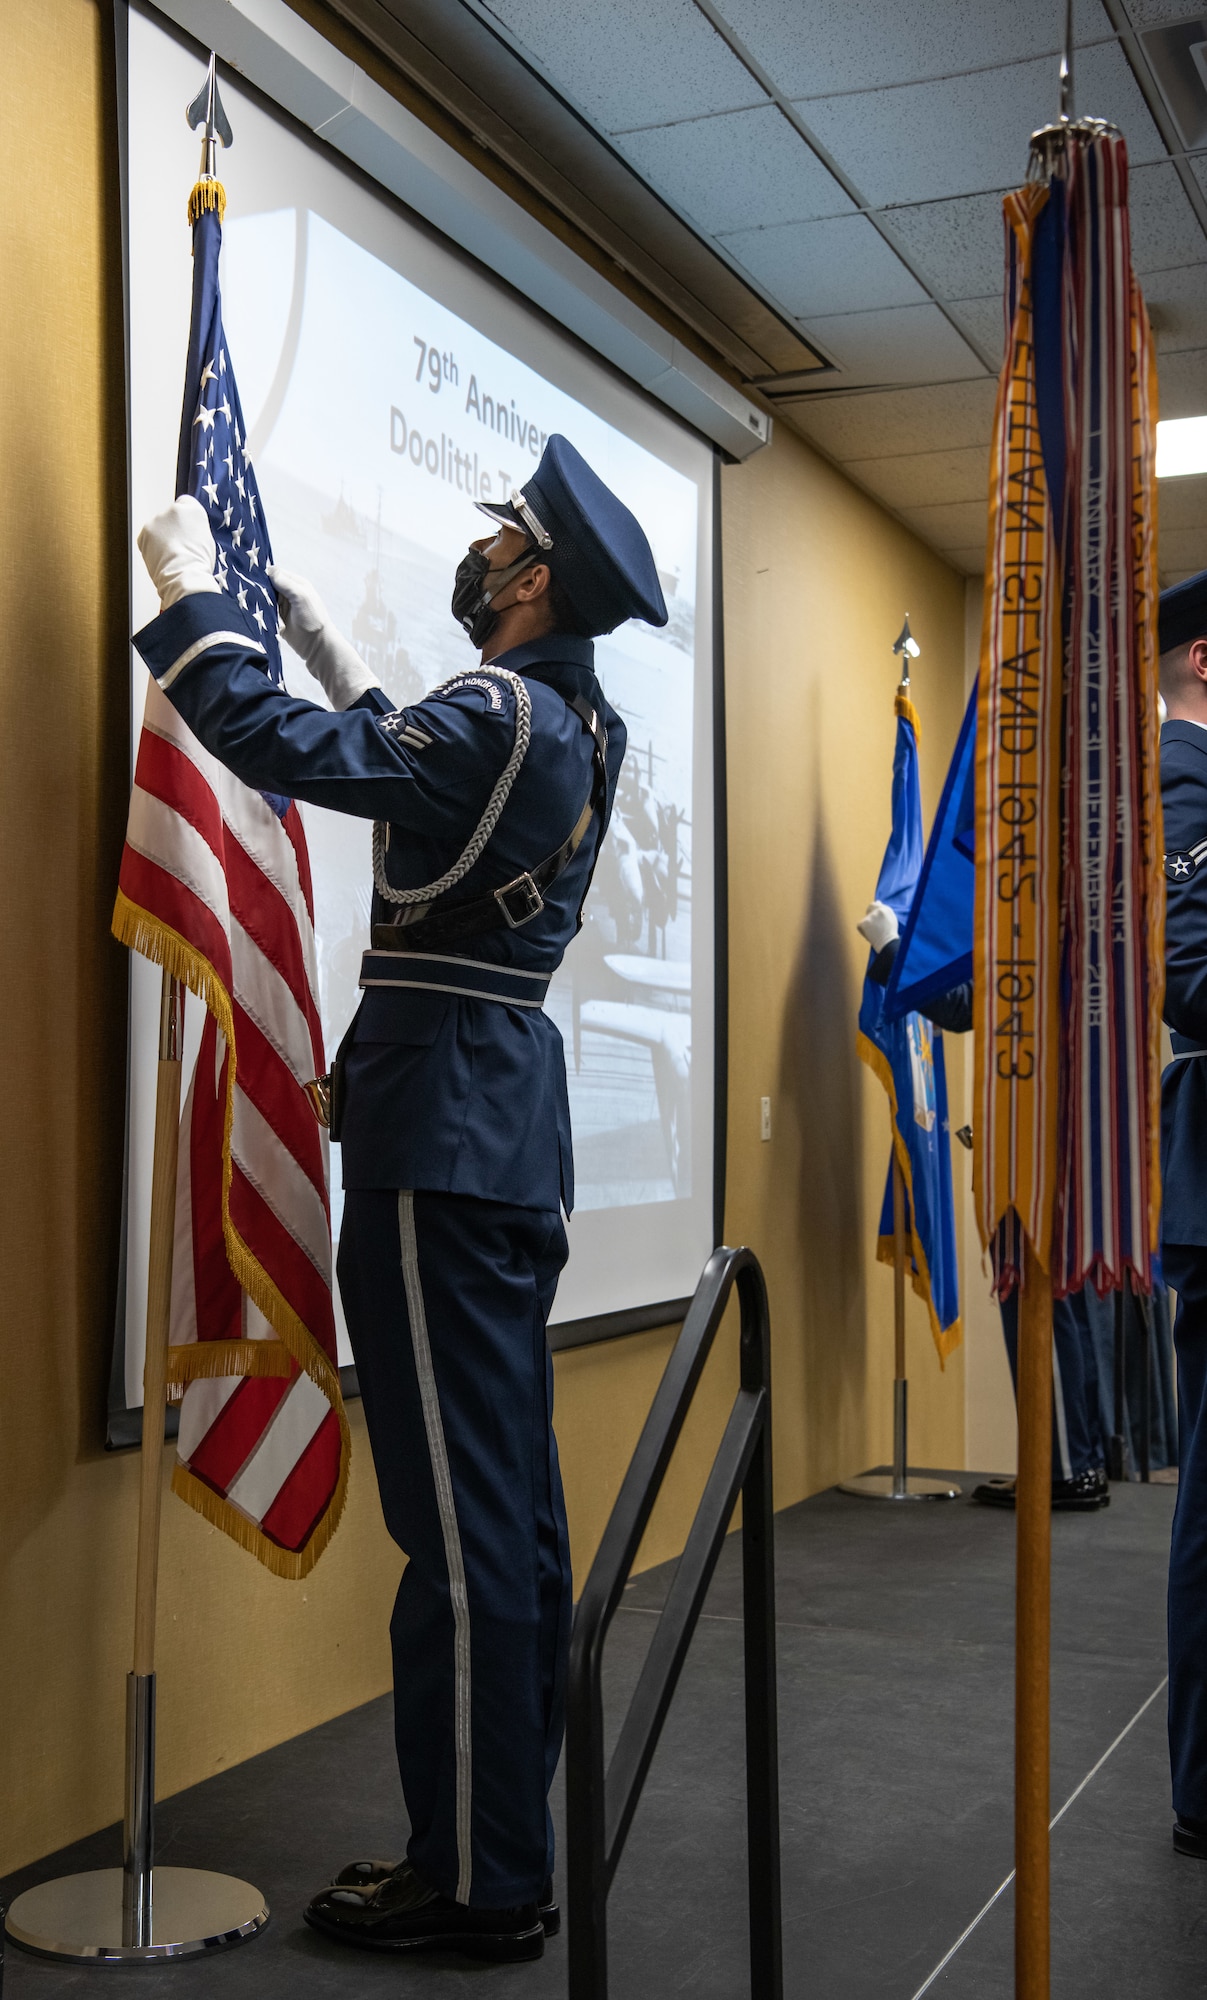 A 28th Bomb Wing Honor Guard member posts the U.S. flag during the 79th Doolittle Raid anniversary ceremony on Ellsworth Air Force Base, S.D., April 16, 2021. The Doolittle Raid took place on April 18, 1942, after Japanese forces launched a surprise bombing on Pearl Harbor. 
(U.S. Air Force photo by Airman Jonah Fronk)